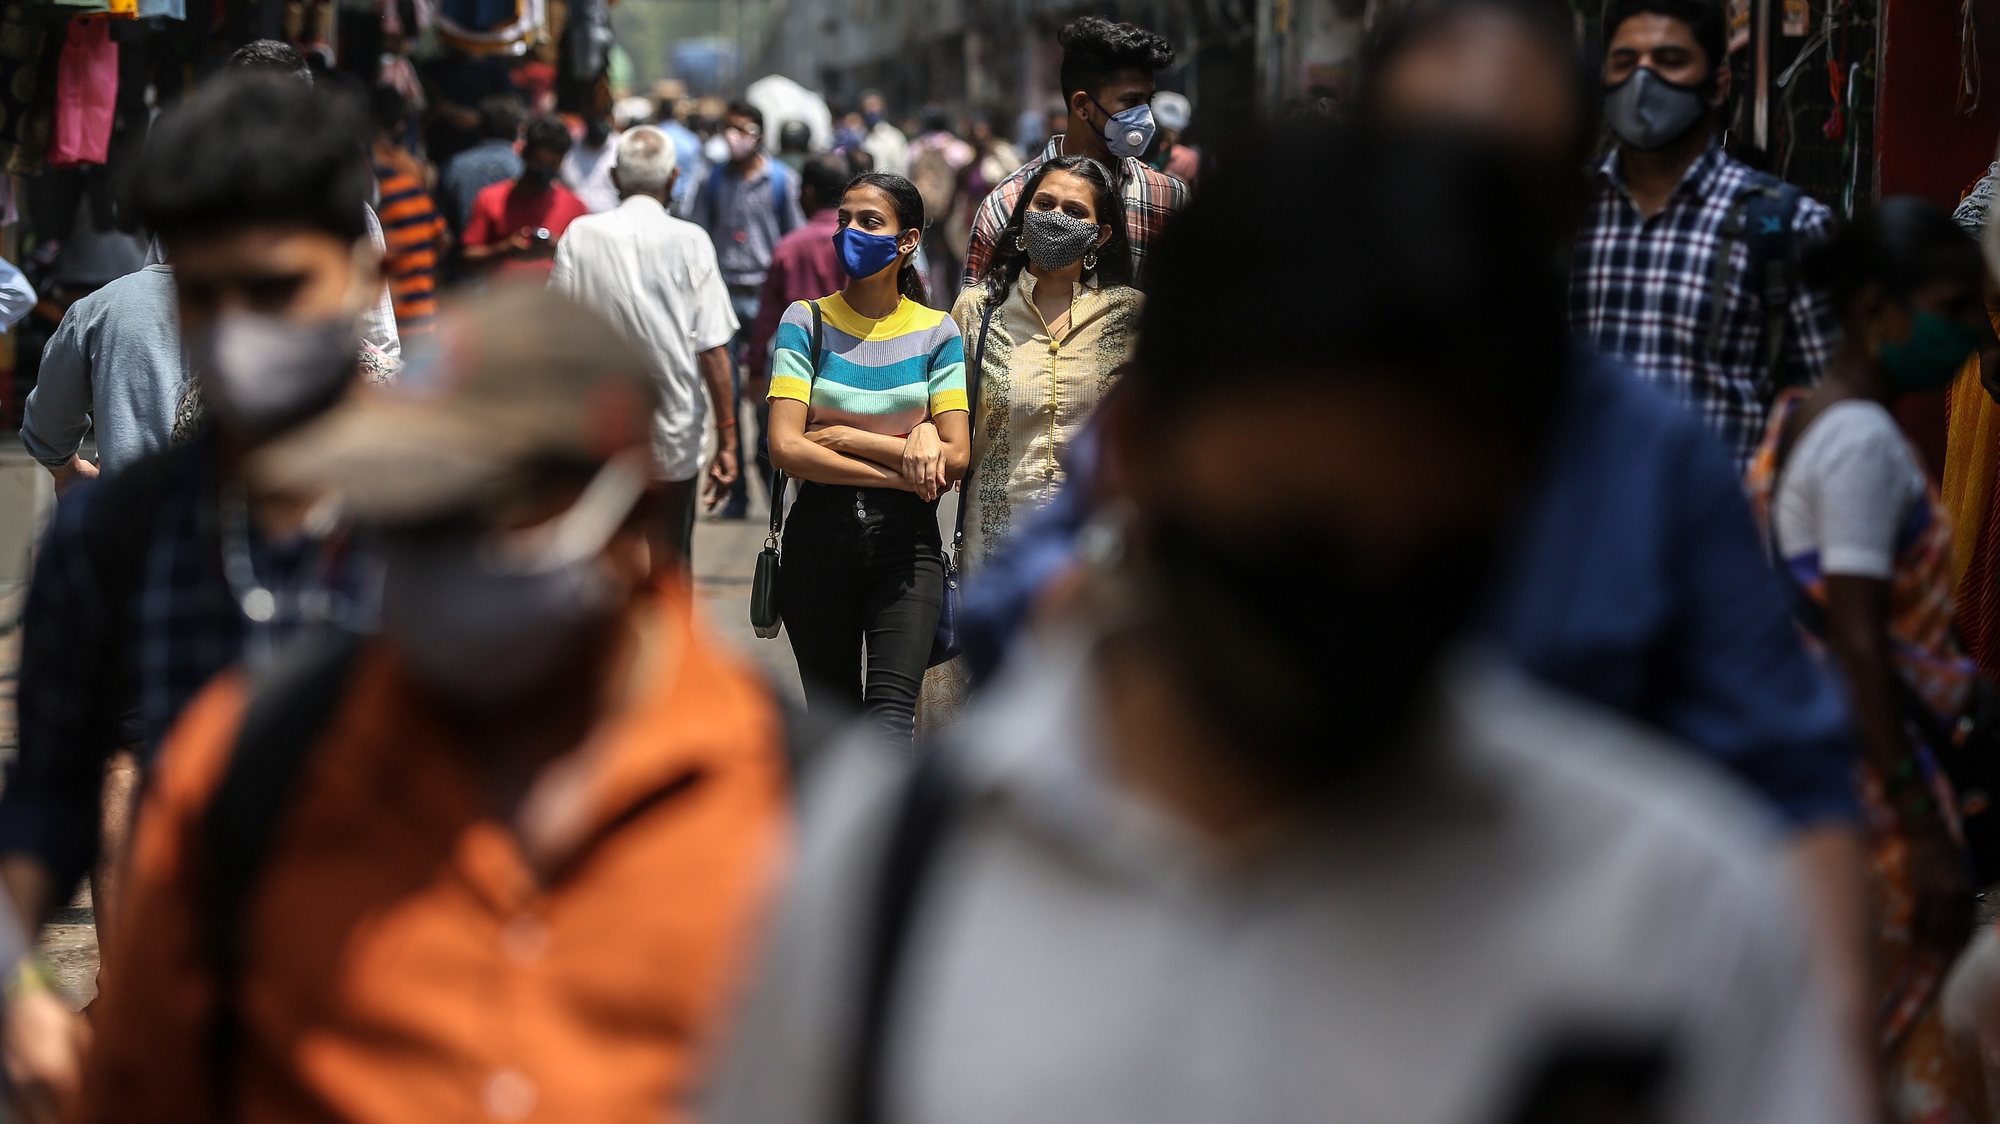 epa09090160 People wearing face masks walk in the streets of Mumbai, India, 22 March 2021. Maharashtra is the worst-hit state and it reported 30,535 fresh COVID-19 positive cases, the highest rise in a single day.  EPA/DIVYAKANT SOLANKI